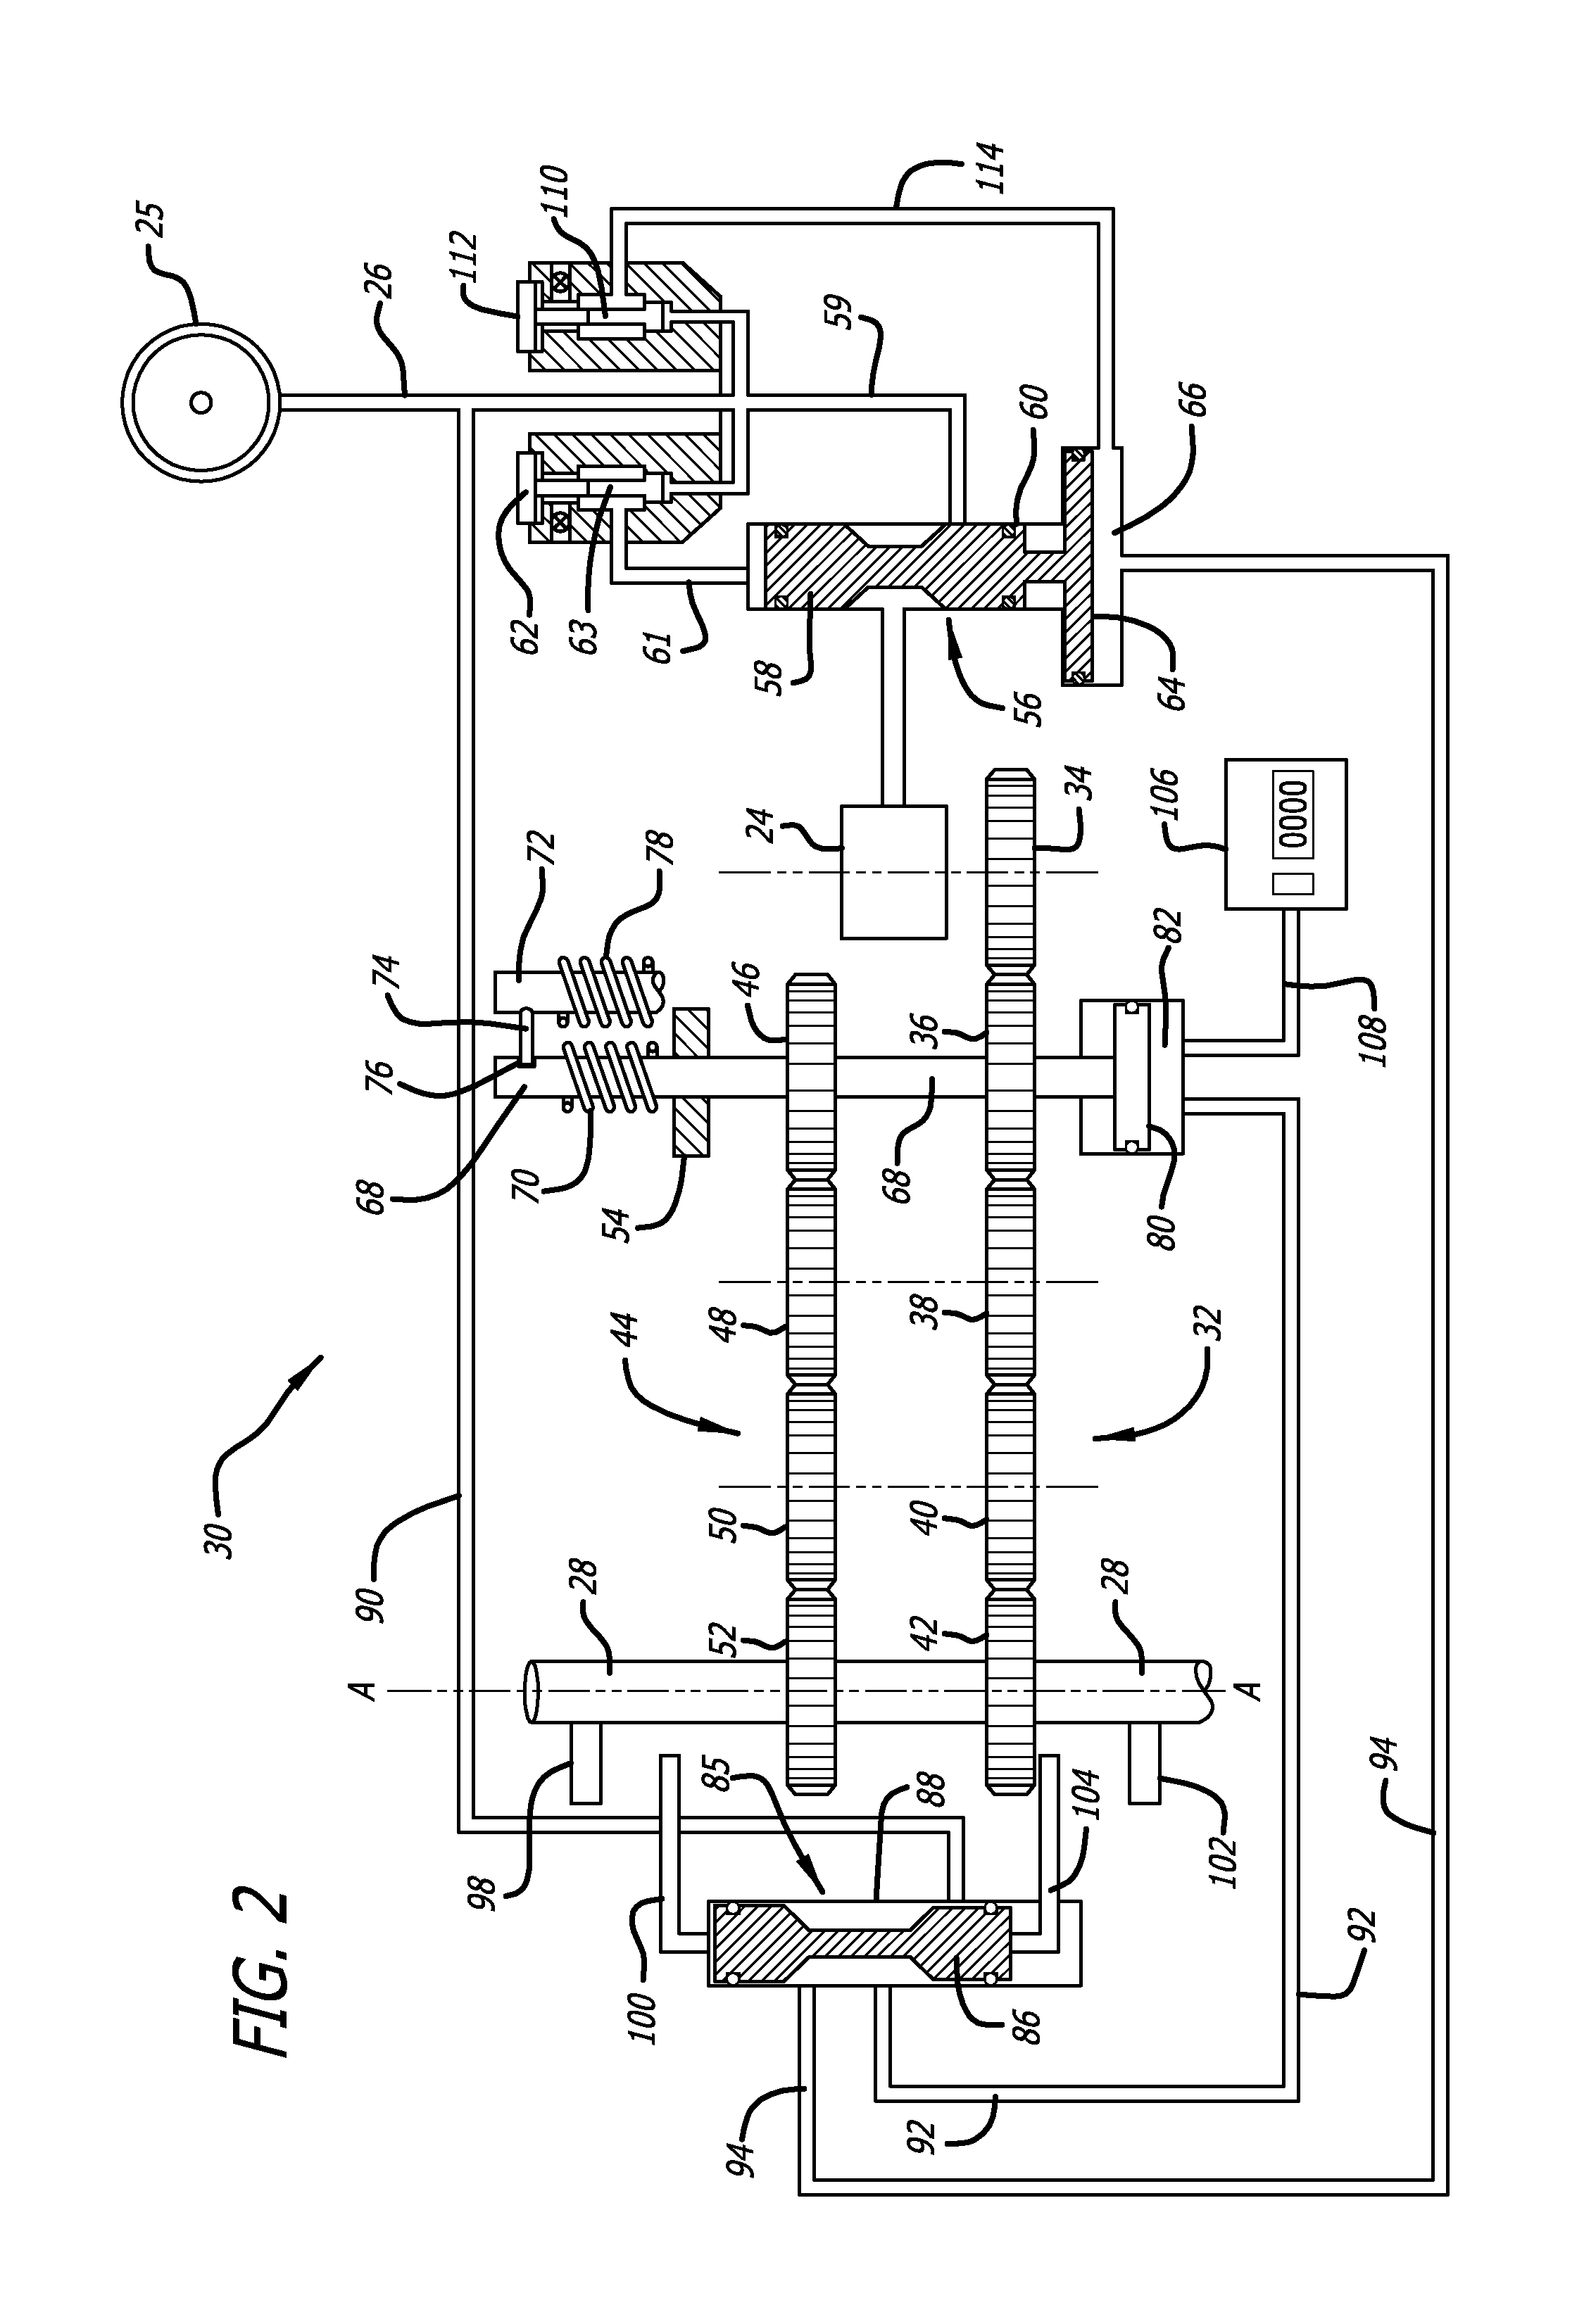 System and method for breaking chips formed by a drilling operation